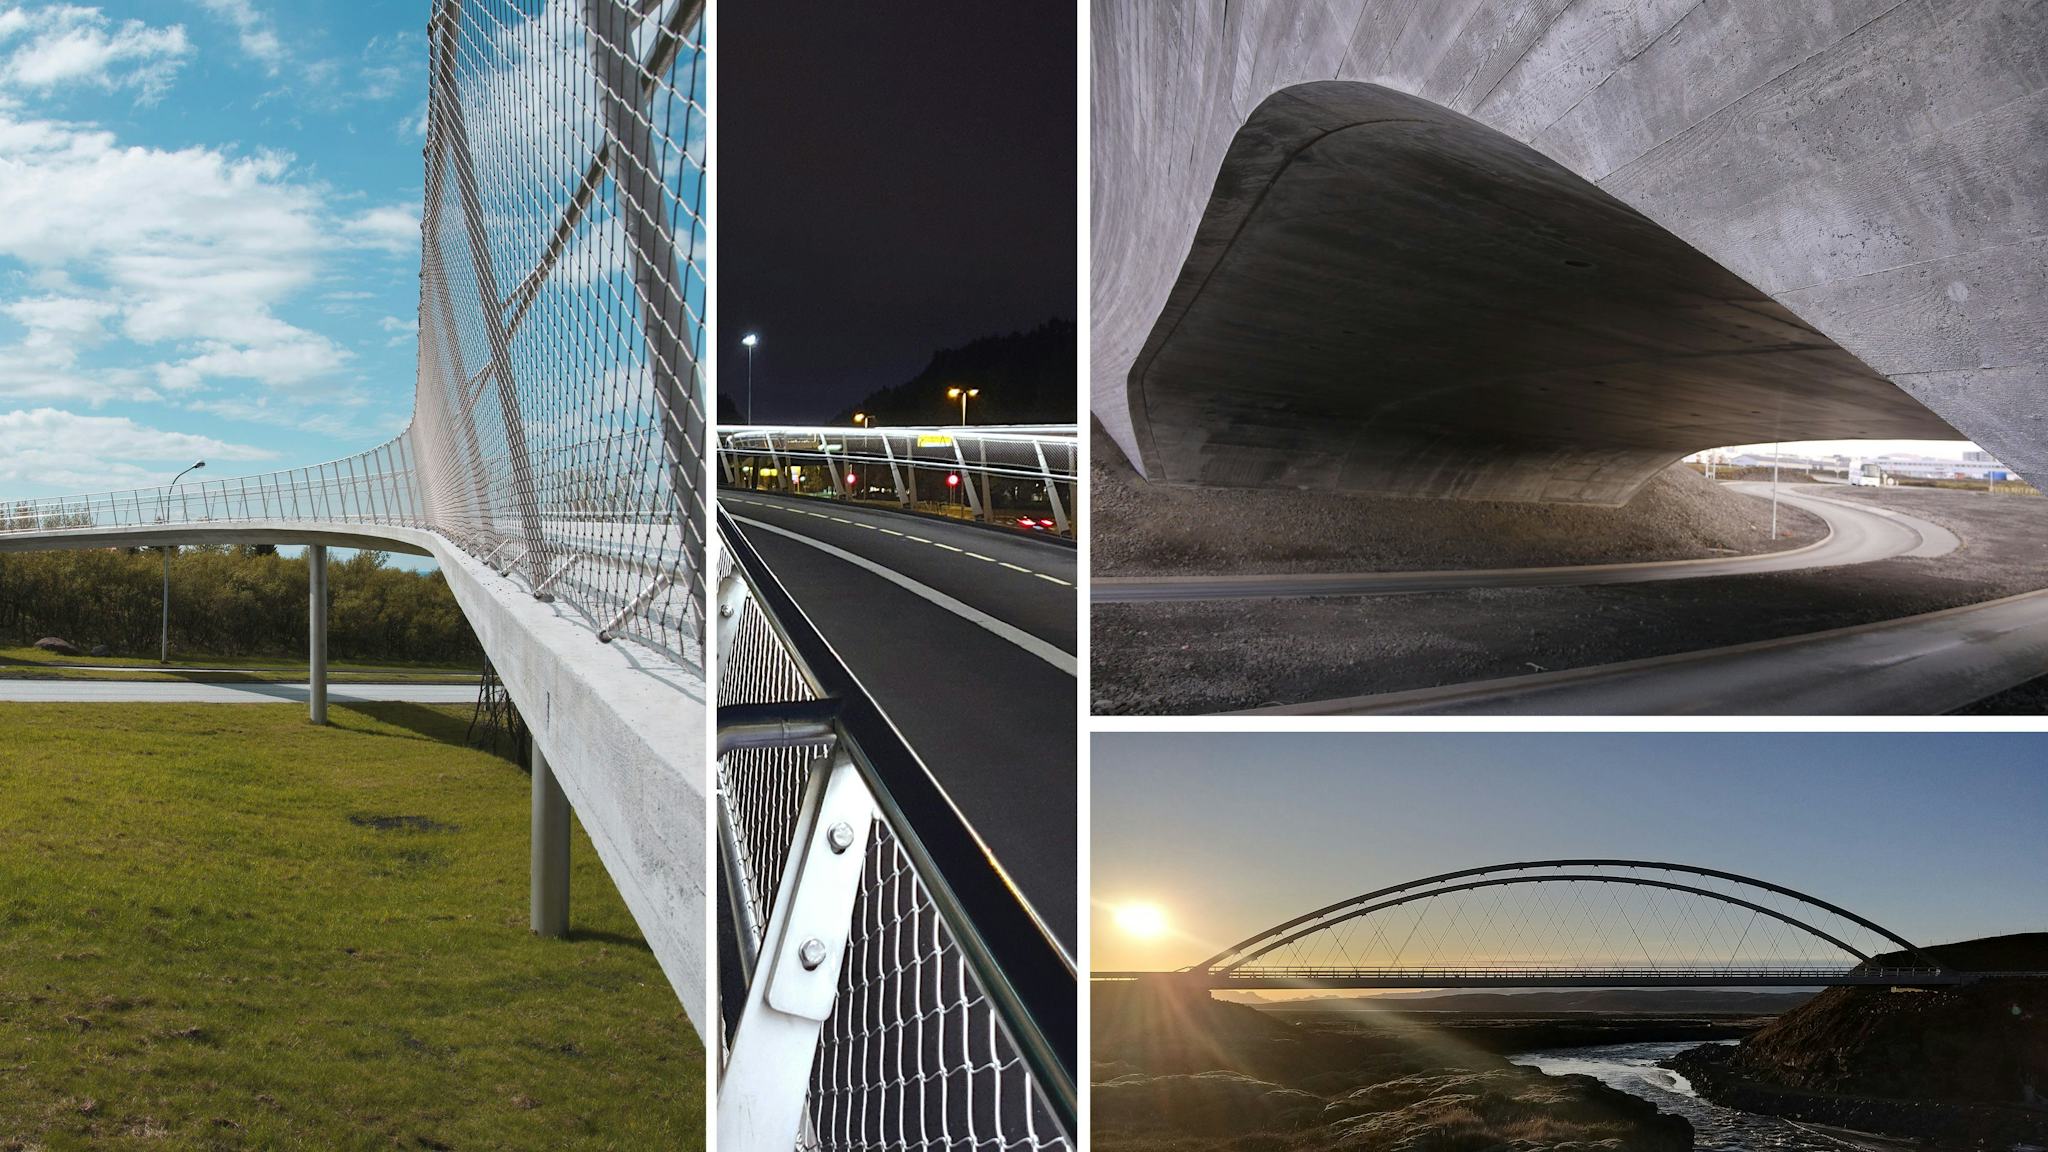 A collage of few photos featuring different perspectives of modern bridges, showcasing architectural design and engineering